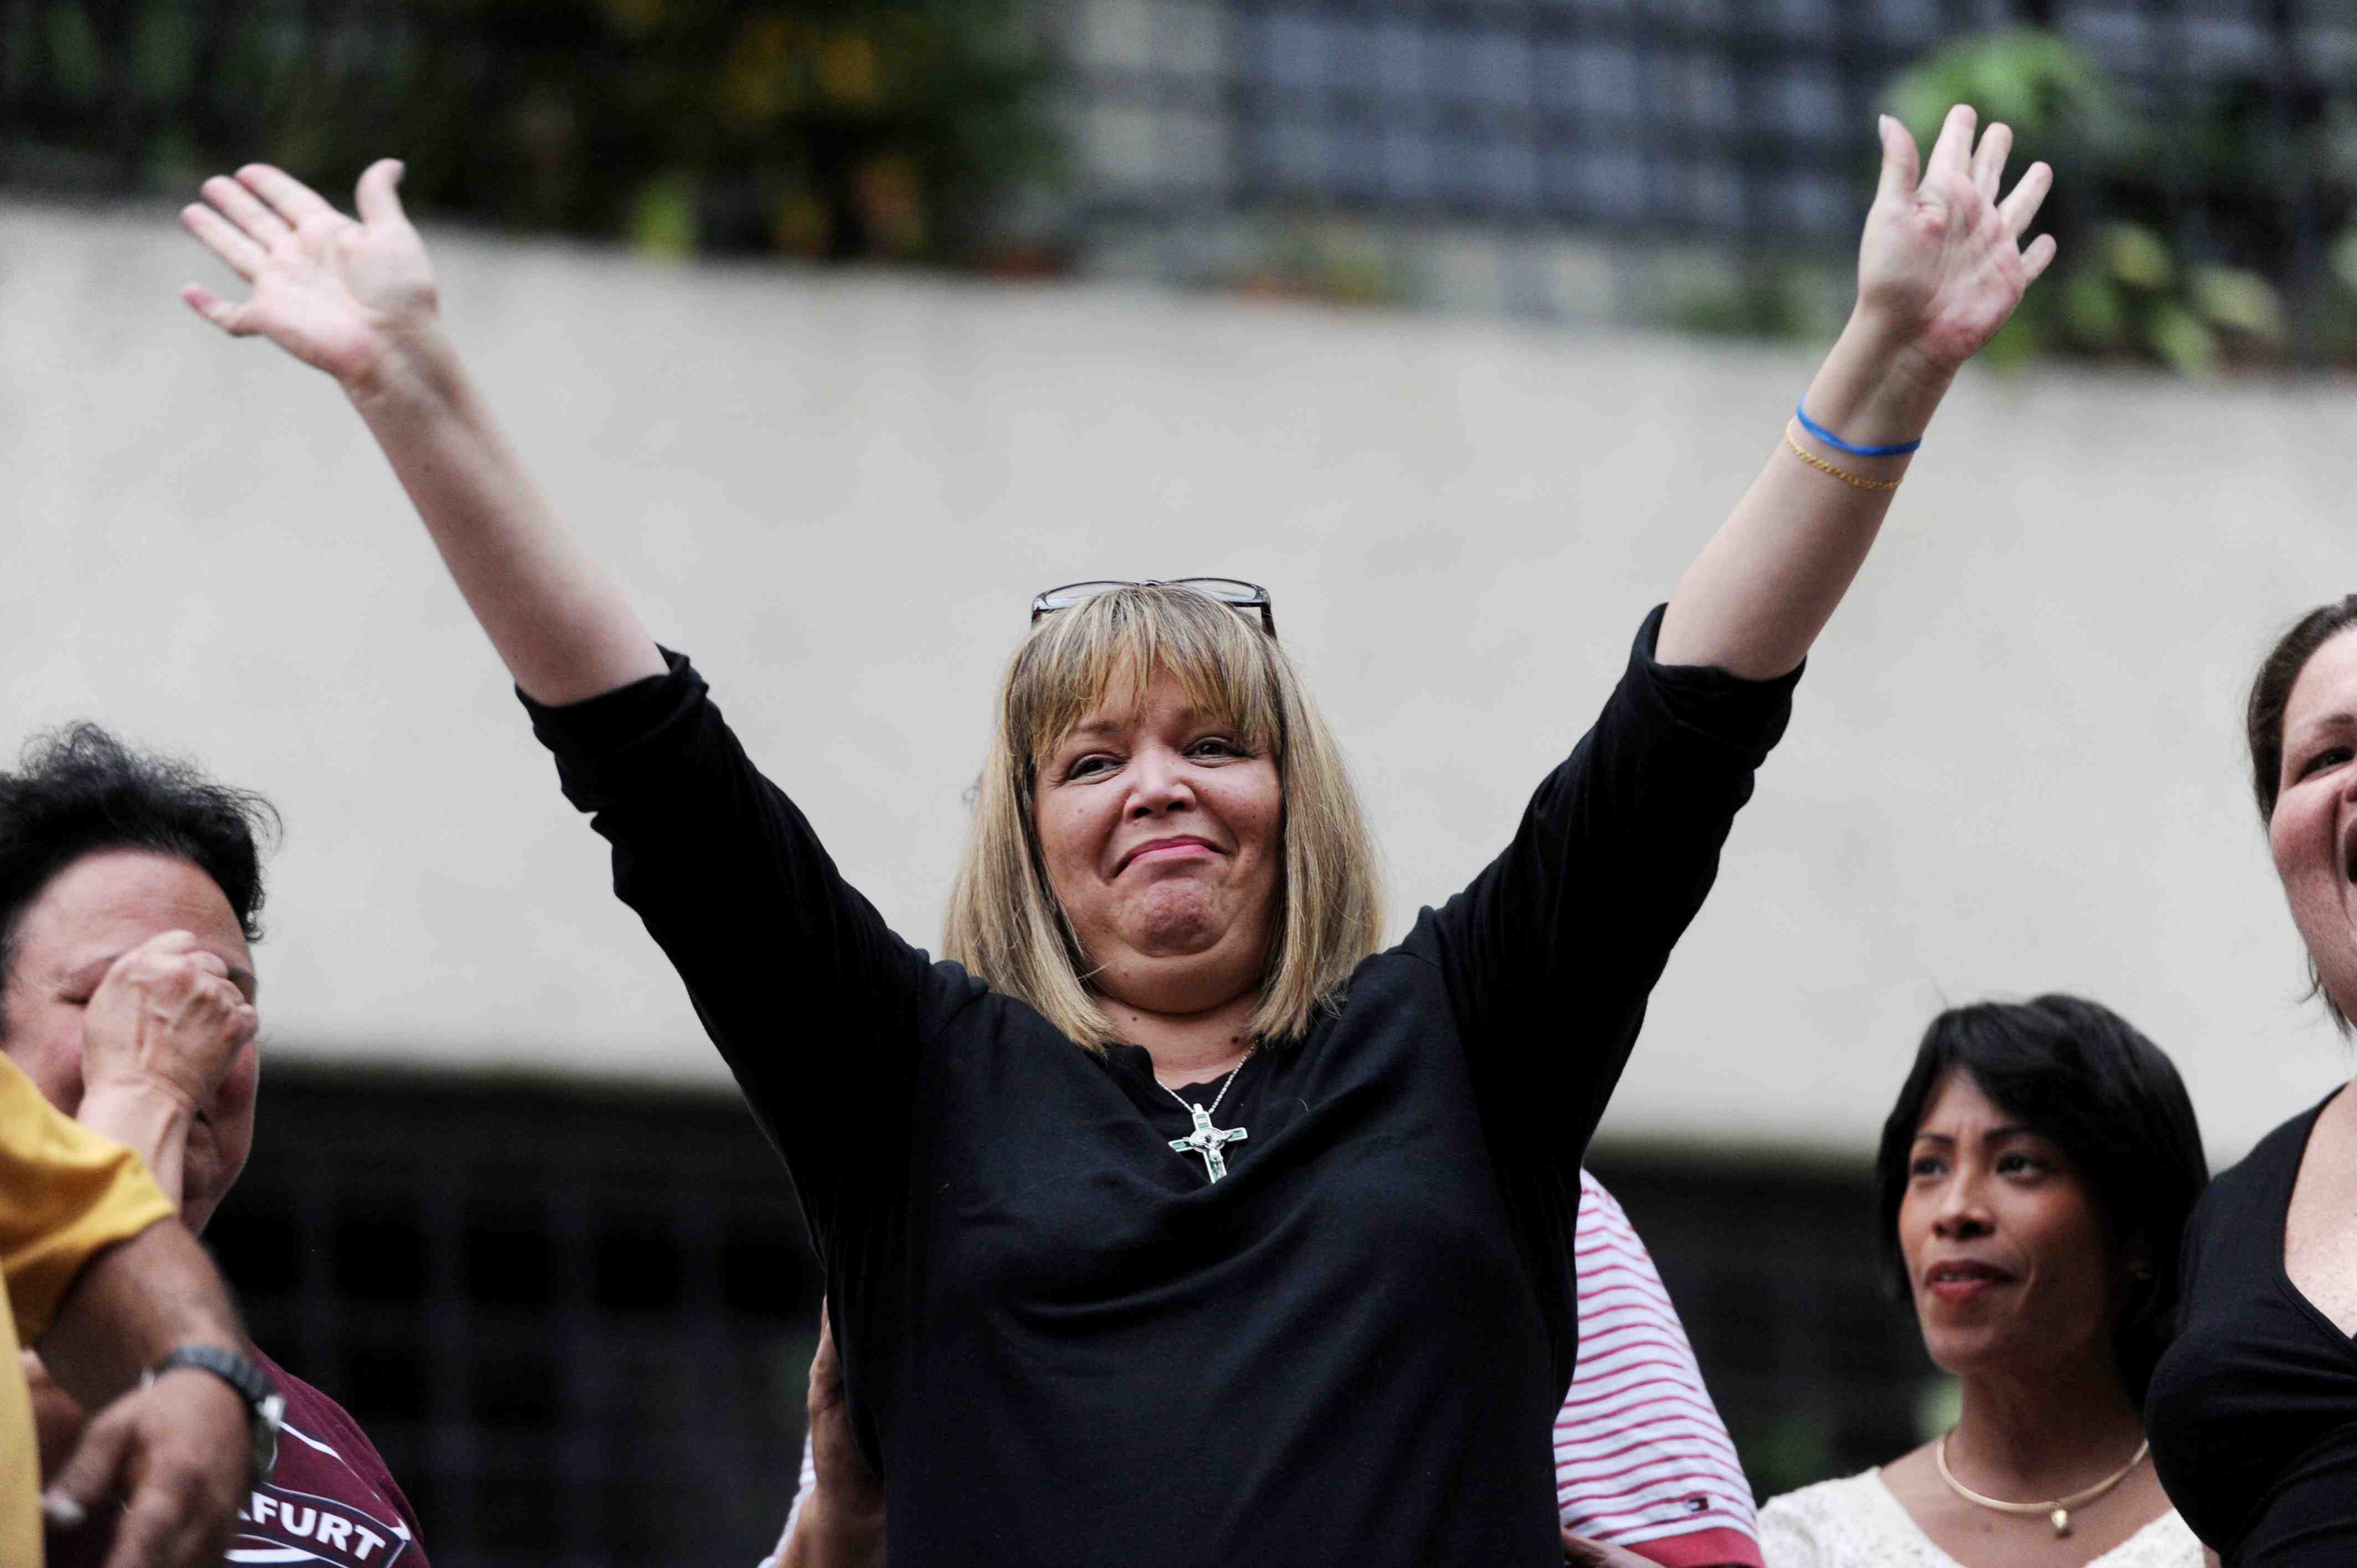 Judge Maria Afiuni waves outside her residence in Caracas on June 14, 2013. Venezuela Friday lifted a house arrest order against a judge who became a human rights cause celebre following her arrest in 2009 on corruption charges. Afiuni had been under house arrest since 2011, after spending more than a year waiting to go on trial.    AFP PHOTO/Leo RAMIREZ